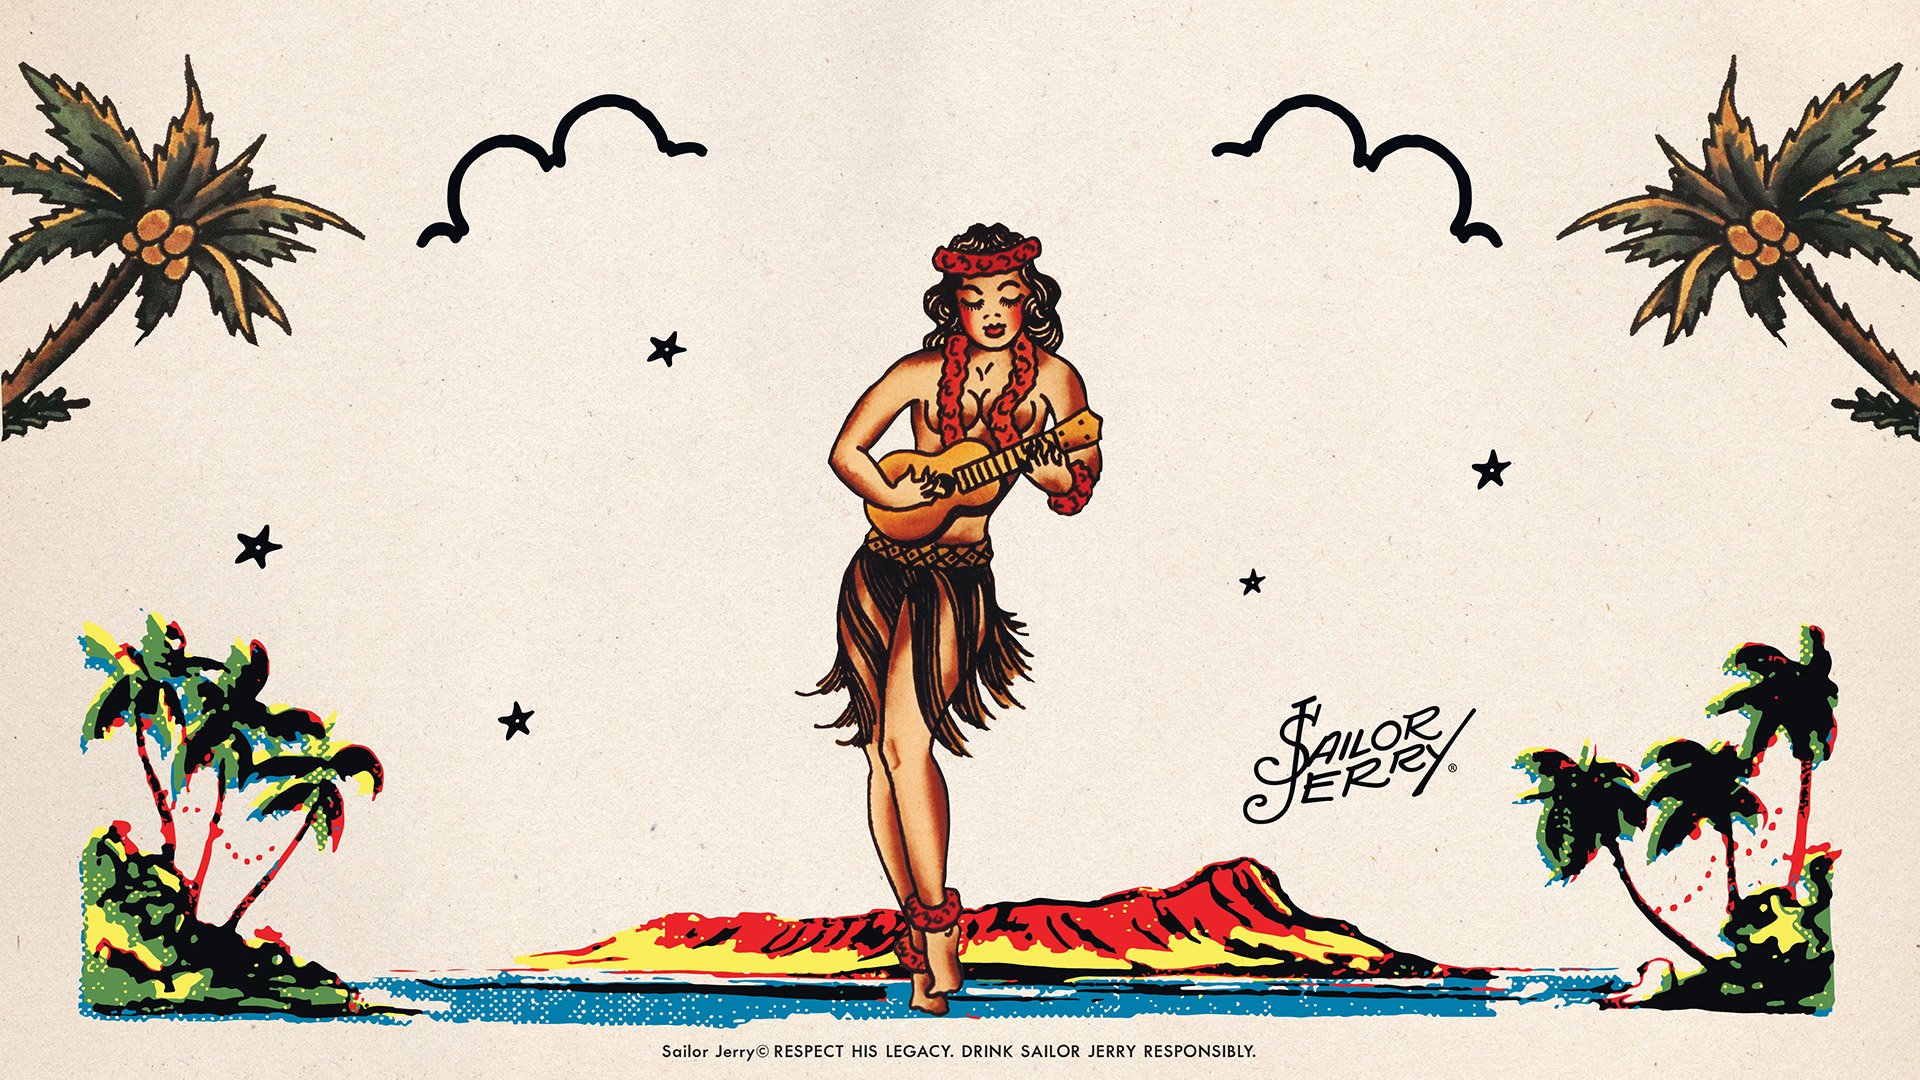 Where it all Began: Sailor Jerry